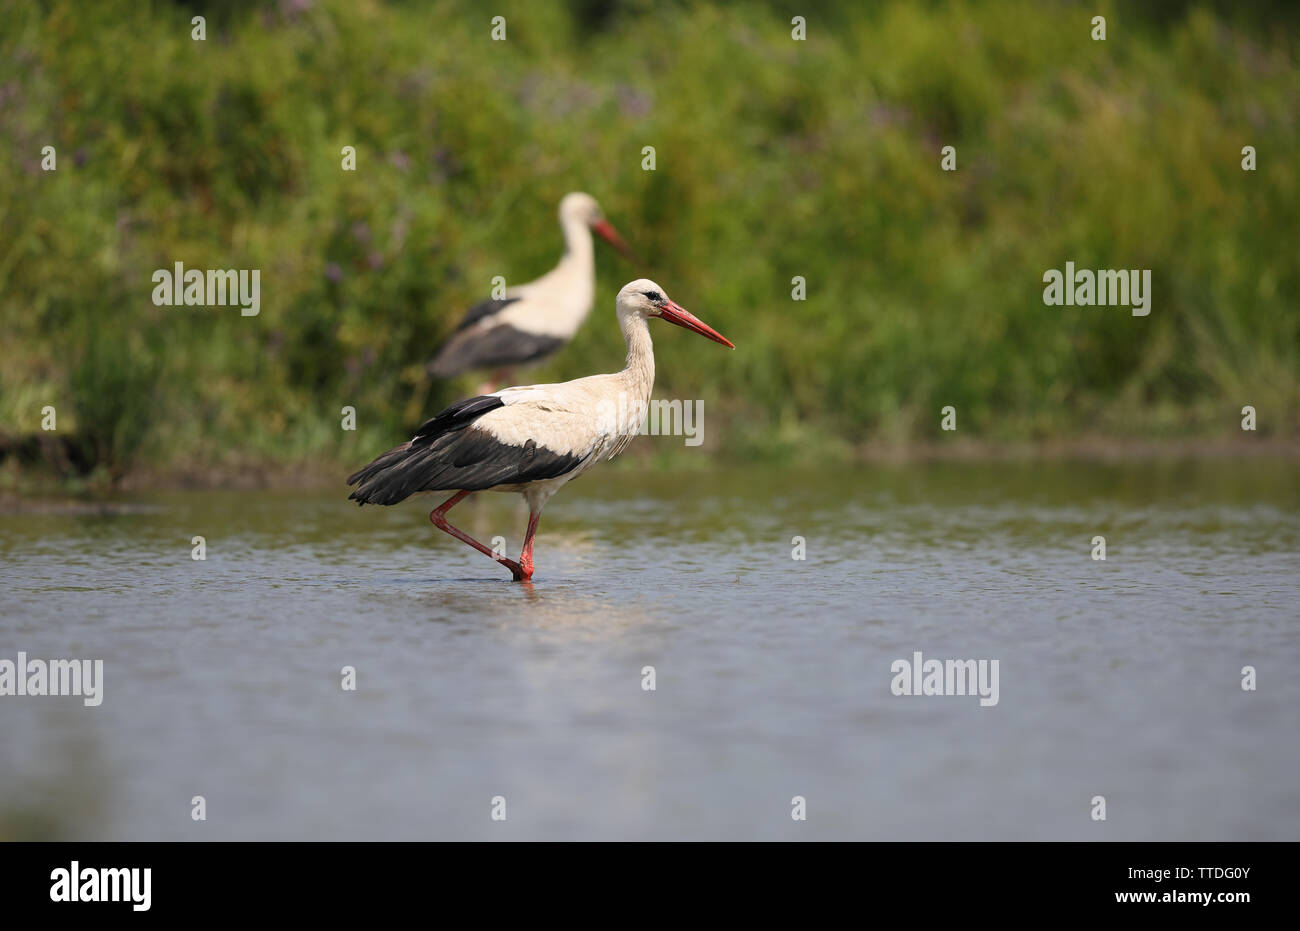 White stork (Ciconia ciconia) by a pond in Hortobagy National Park, Hungary Stock Photo